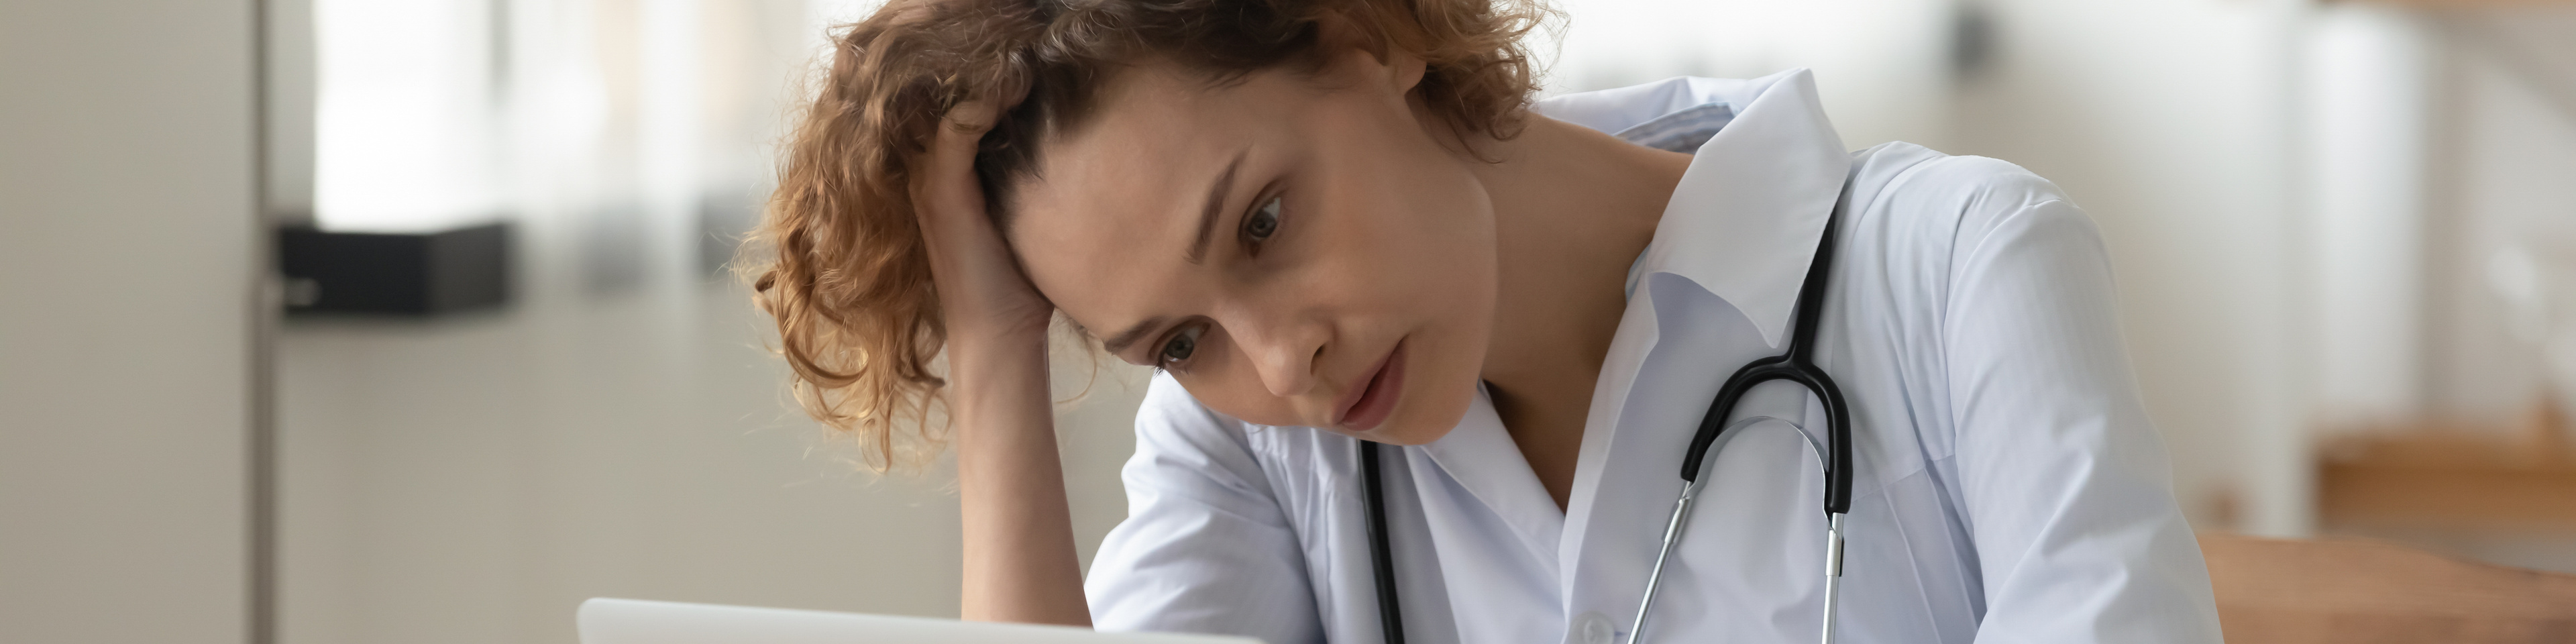 Stressed young female doctor looking at laptop worried